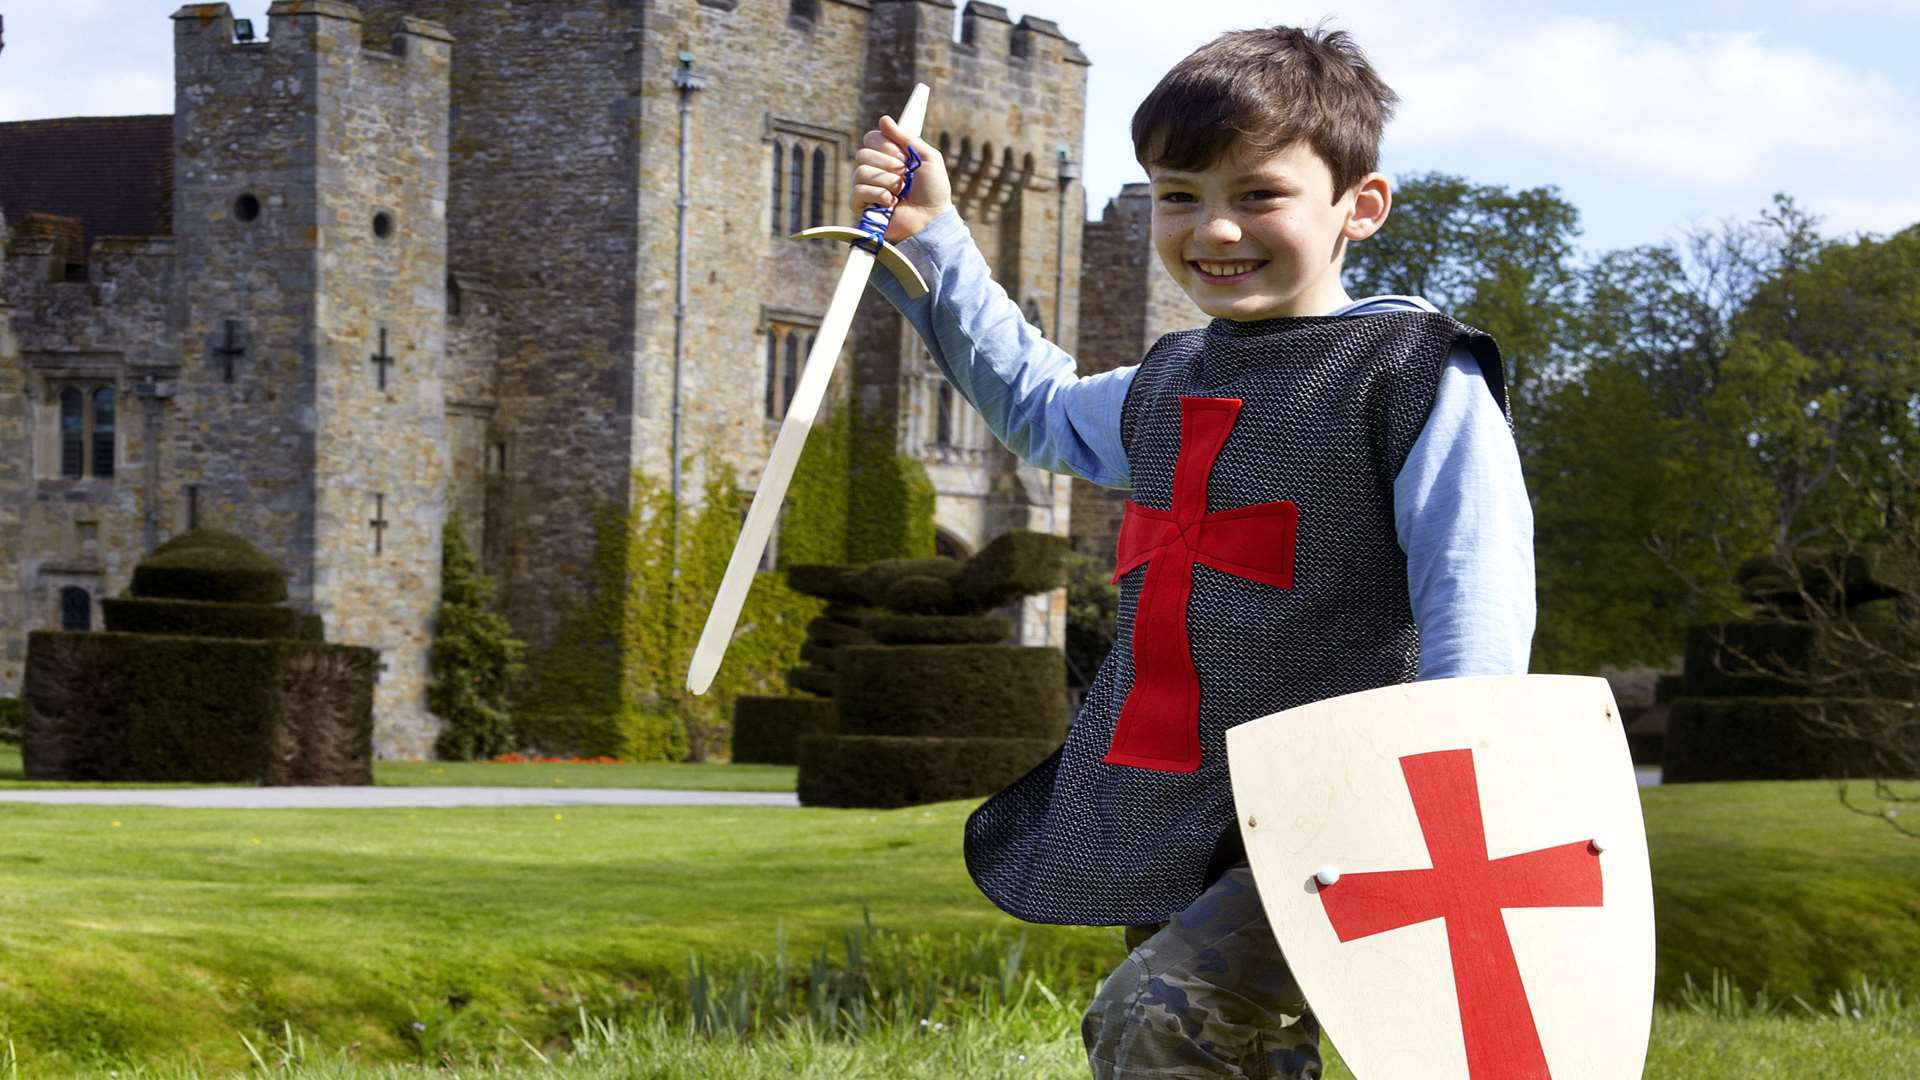 Children are invited to sign up for a spot of free medieval training at historic Hever Castle in Kent this summer